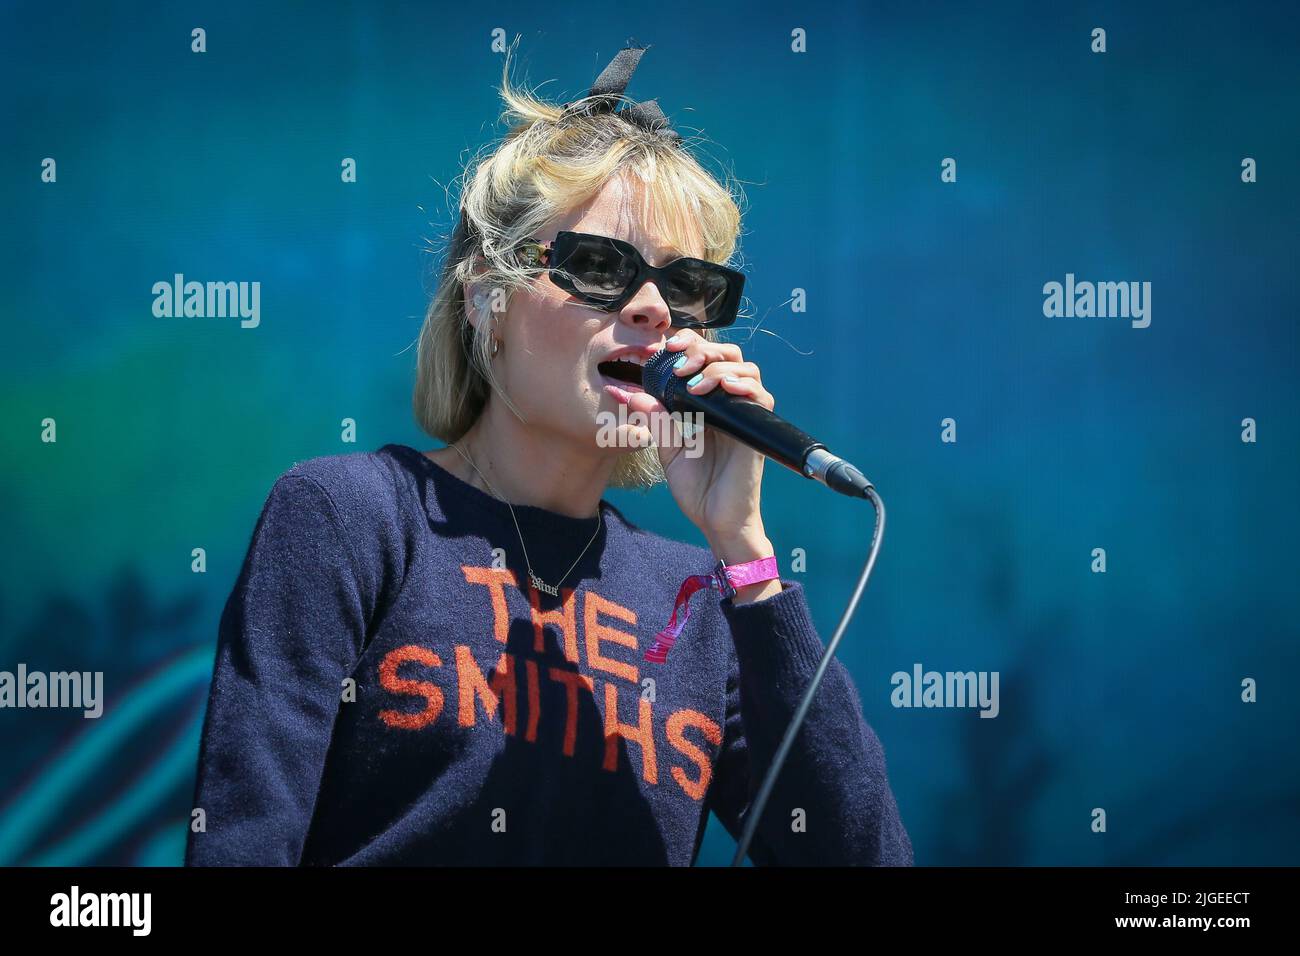 Glasgow, UK. 10th July, 2021. On the third and final day of the TRNSMT music festival held on Glasgow Green, Glasgow, Scotland UK, NINA NISBITT opened the main stage in front of a sell-out maximum capacity audience of 50,000. Credit: Findlay/Alamy Live News Stock Photo